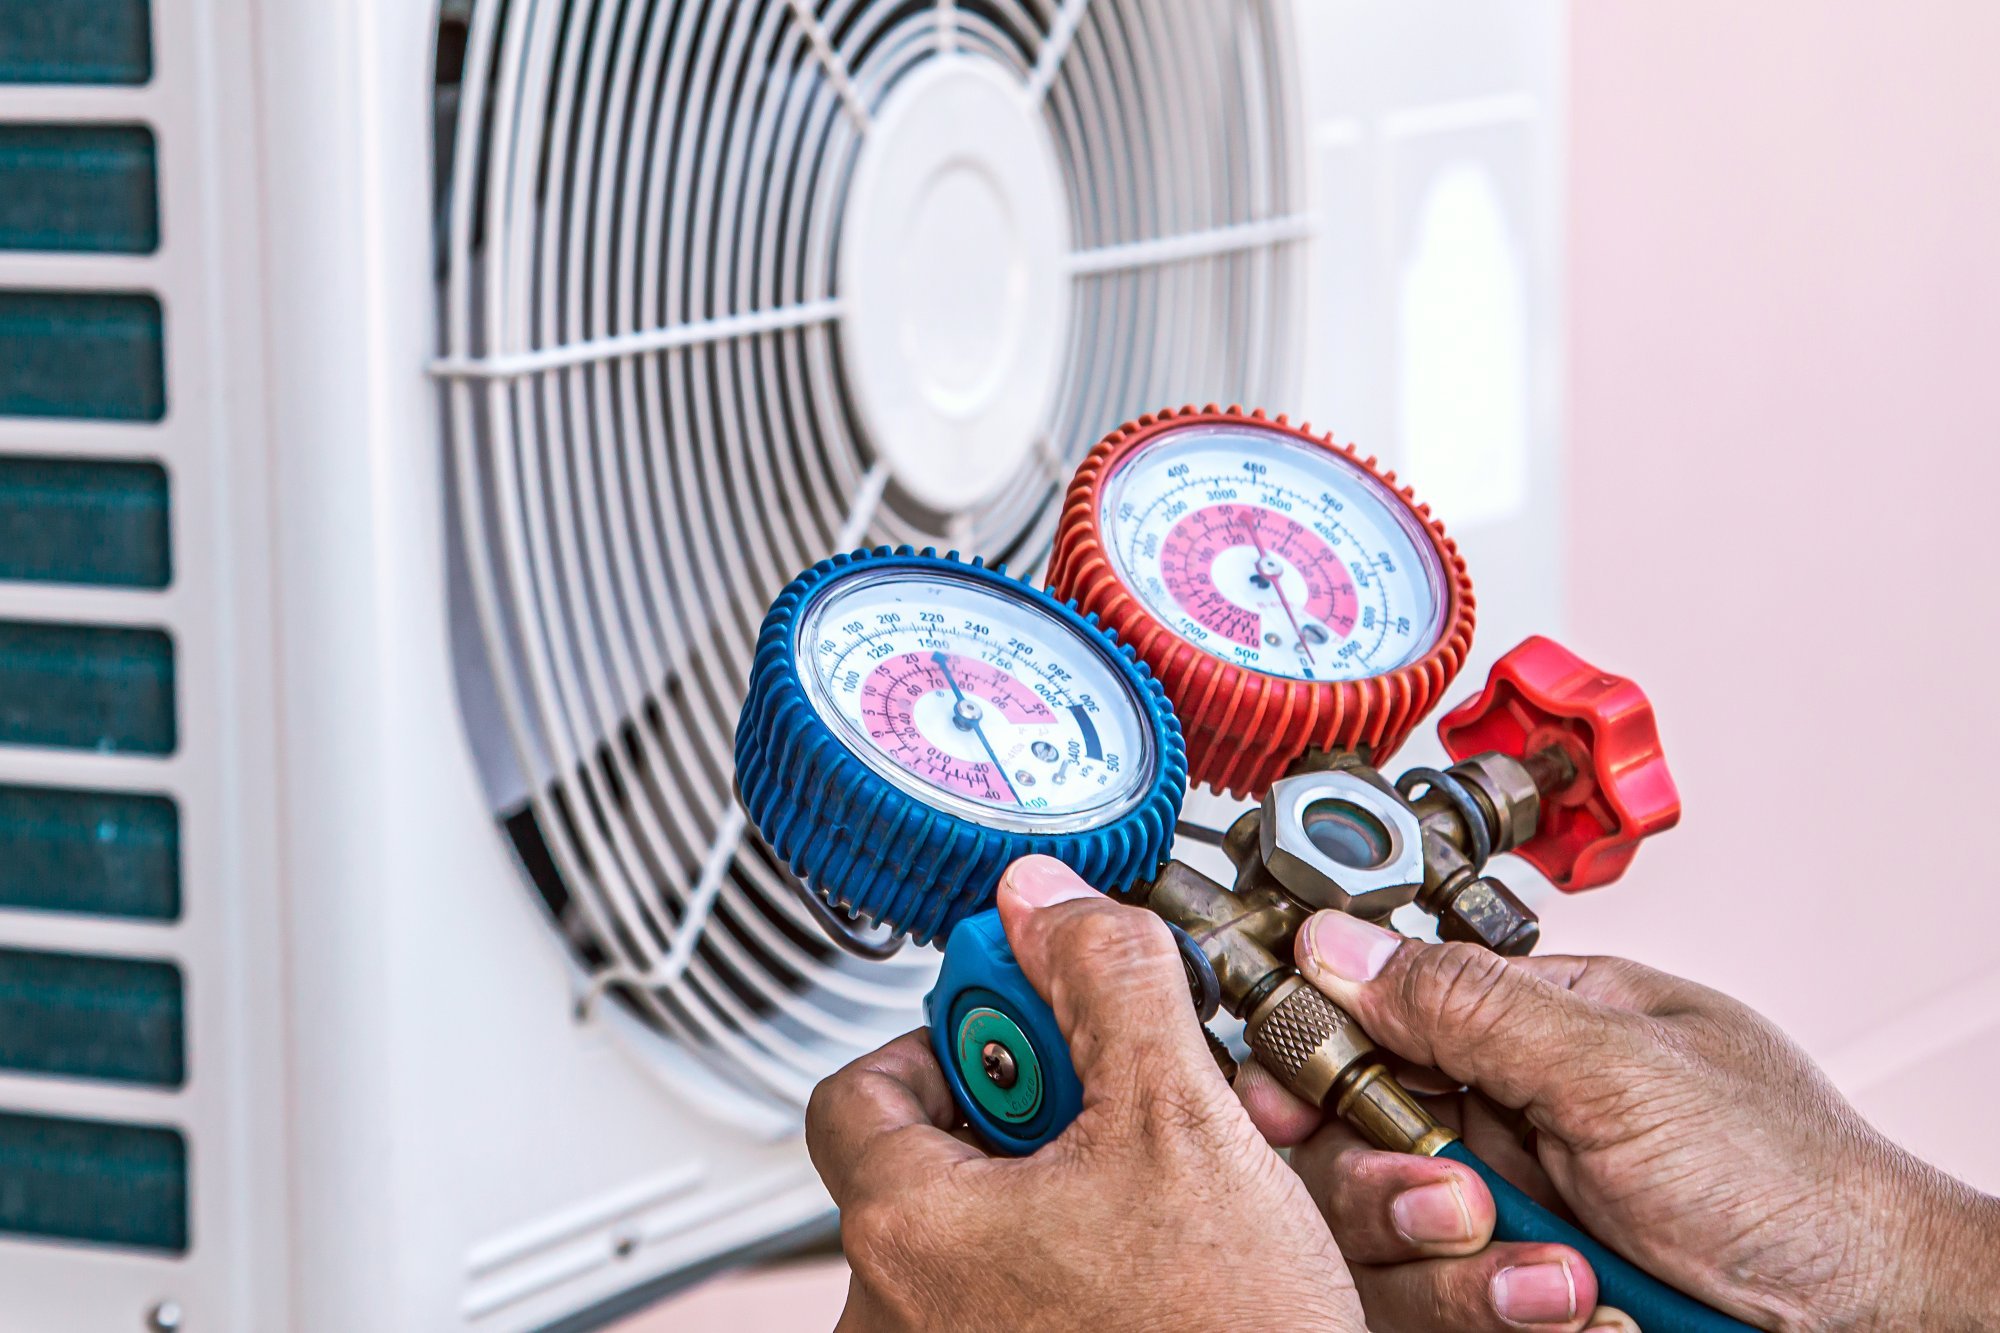 close-up-hand-technician-using-manifold-gauge-filling-air-conditioners.jpg